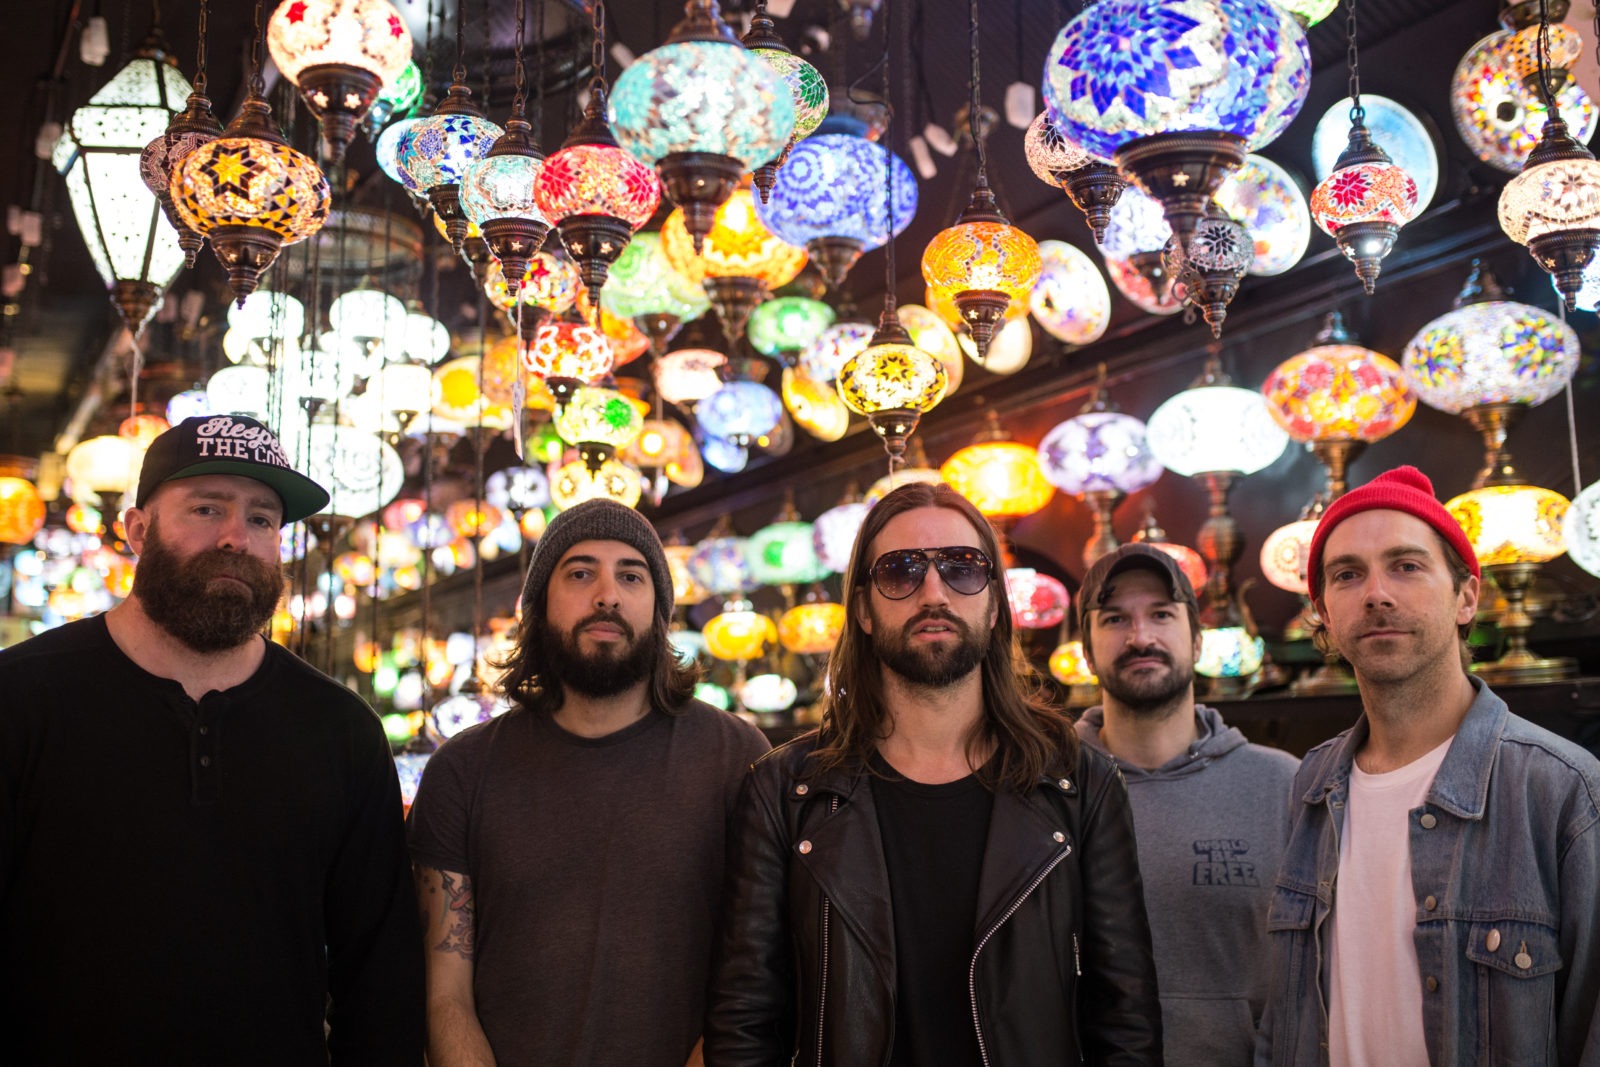 Every Time I Die Announces New Album, Video at Rolling Stone